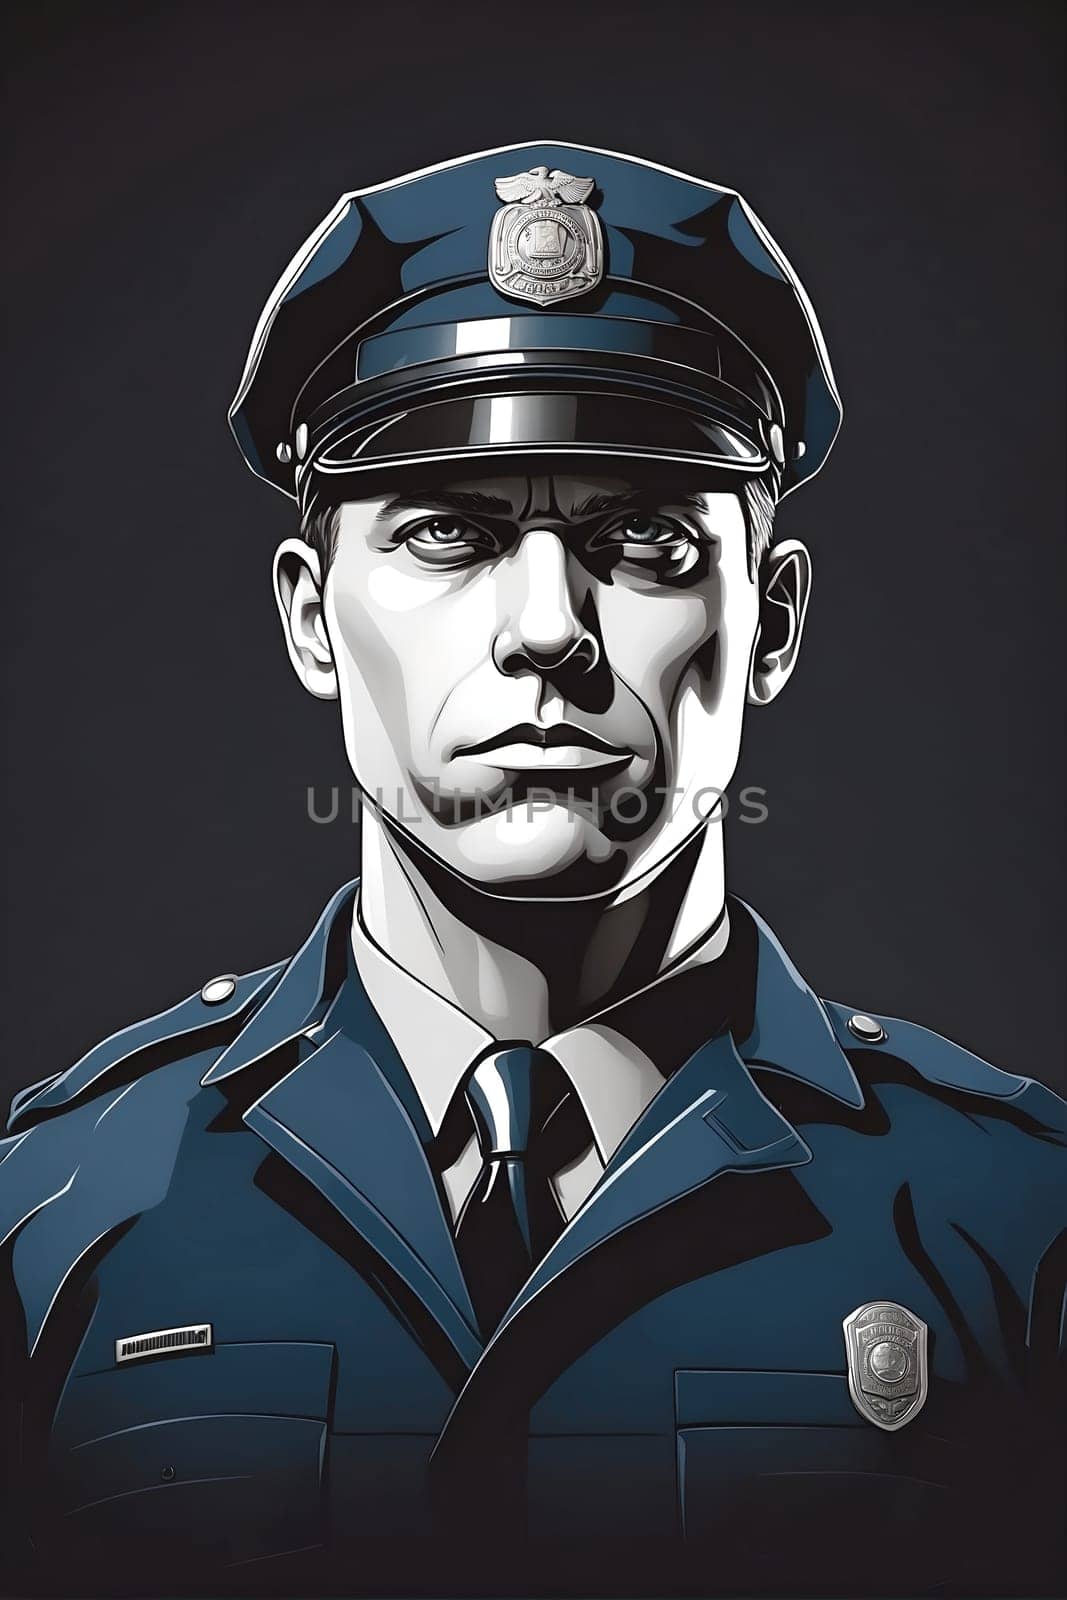 A striking painting depicting a man dressed in a police uniform, capturing the essence and authority of law enforcement.